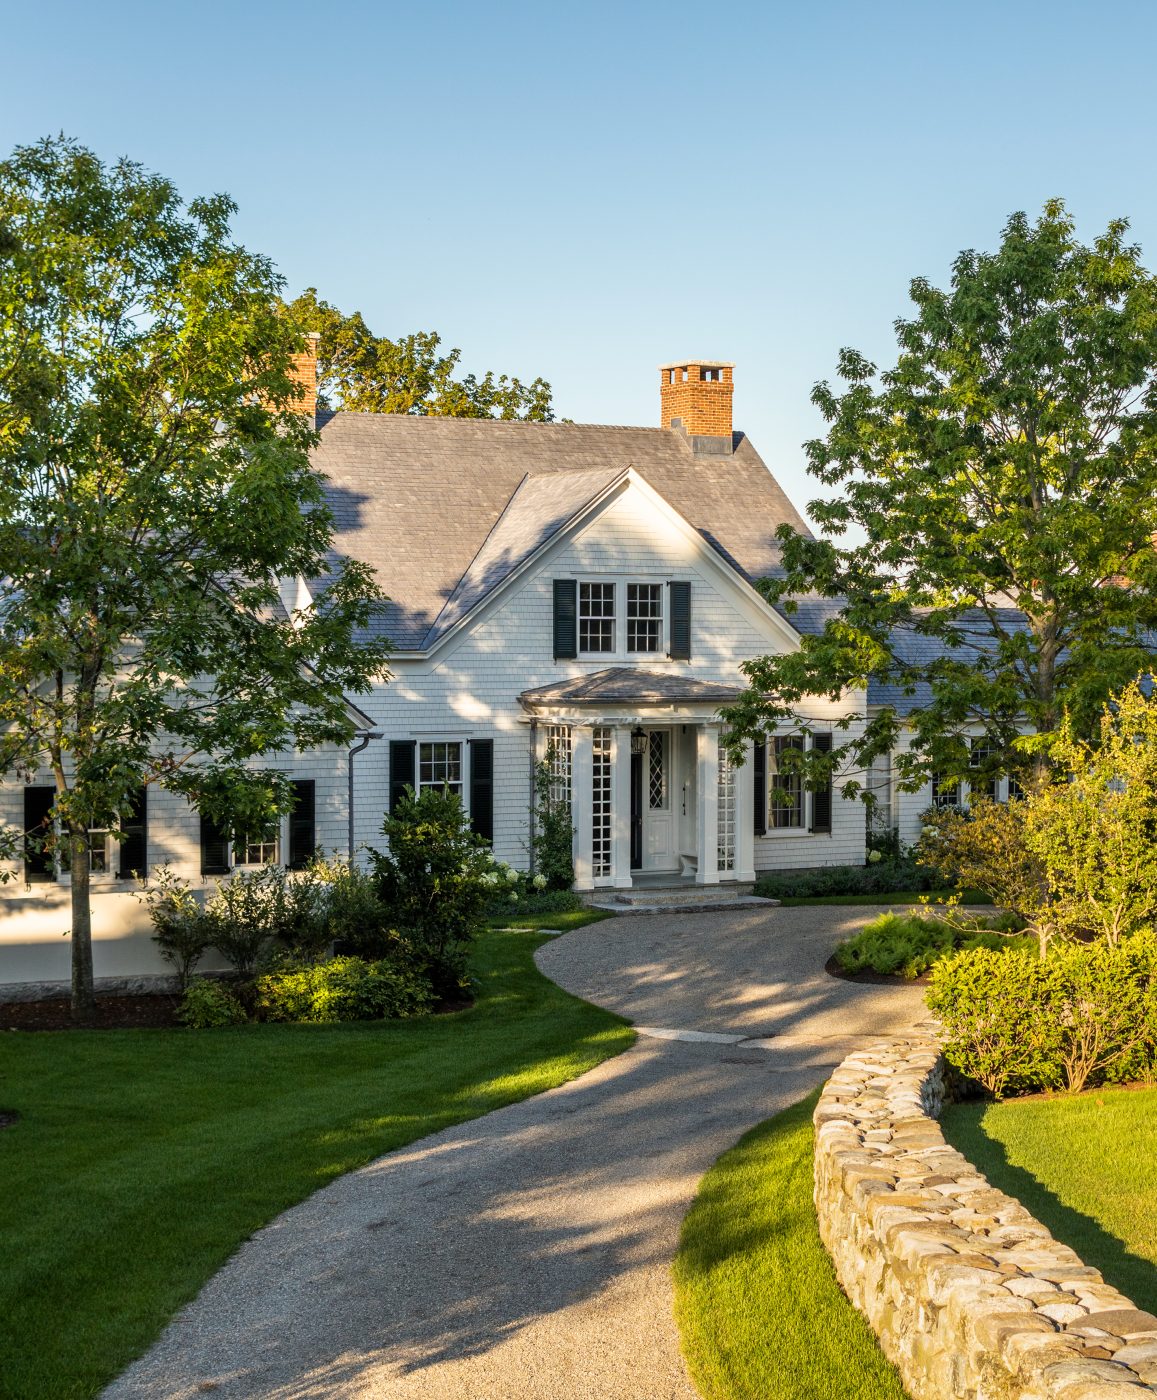 Modest white shingle home in Downeast Maine by Gil Schafer III in his new book Home at Last: Enduring Design for the New American Home Rizzoli publisher written with Mark Kristal